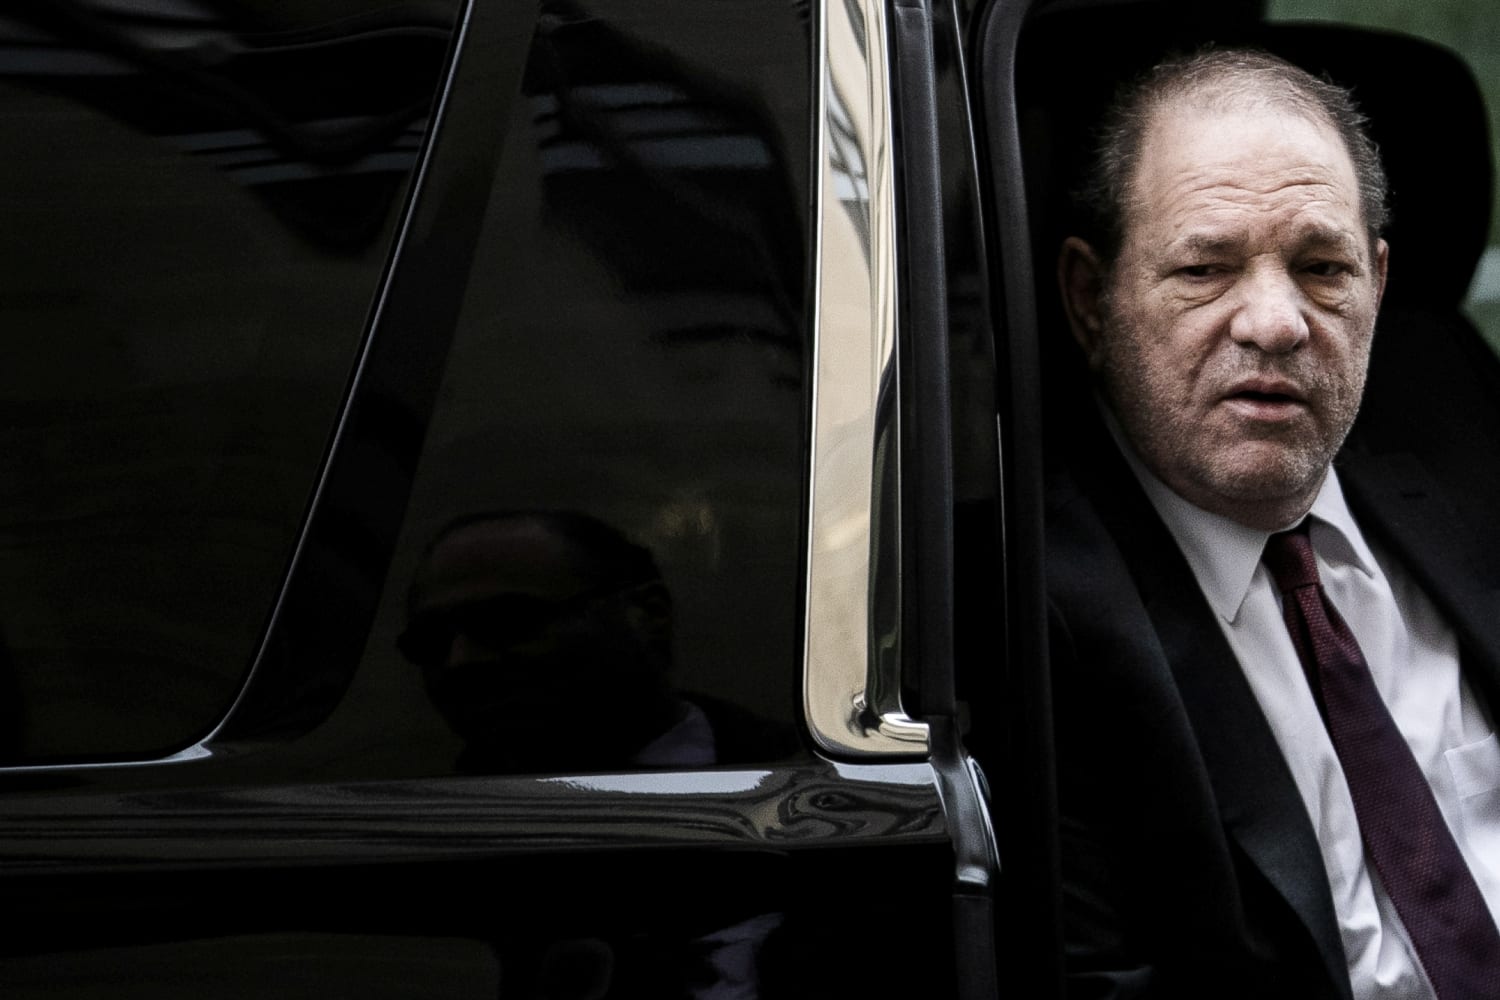 Harvey Weinstein’s appeal on rape conviction is granted by New York appeals court